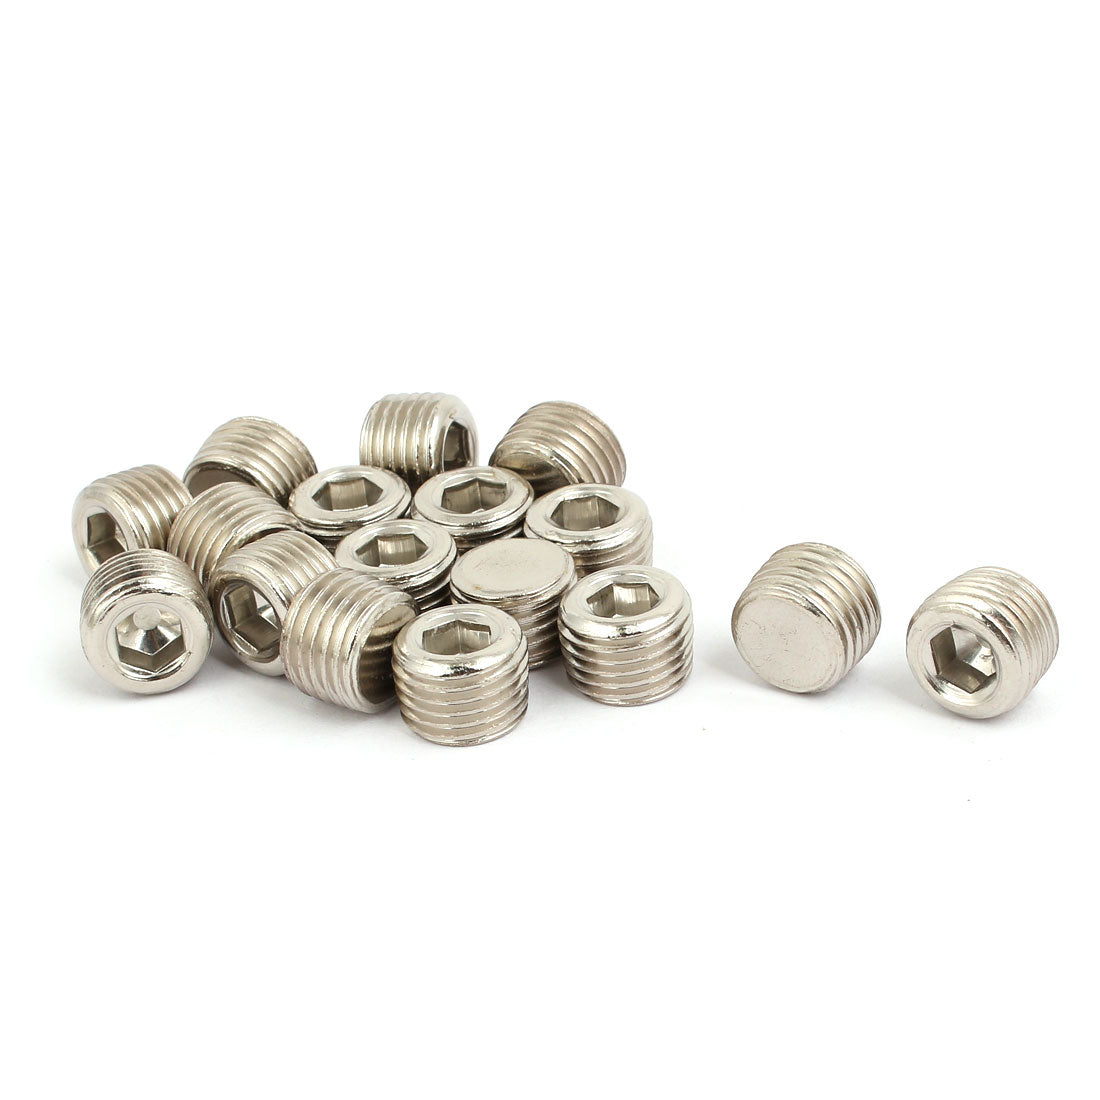 uxcell Uxcell 17 Pcs 13mm 1/4 BSP Thread Internal Hex Head Pipe Connectors Stainless Steel Silver Tone